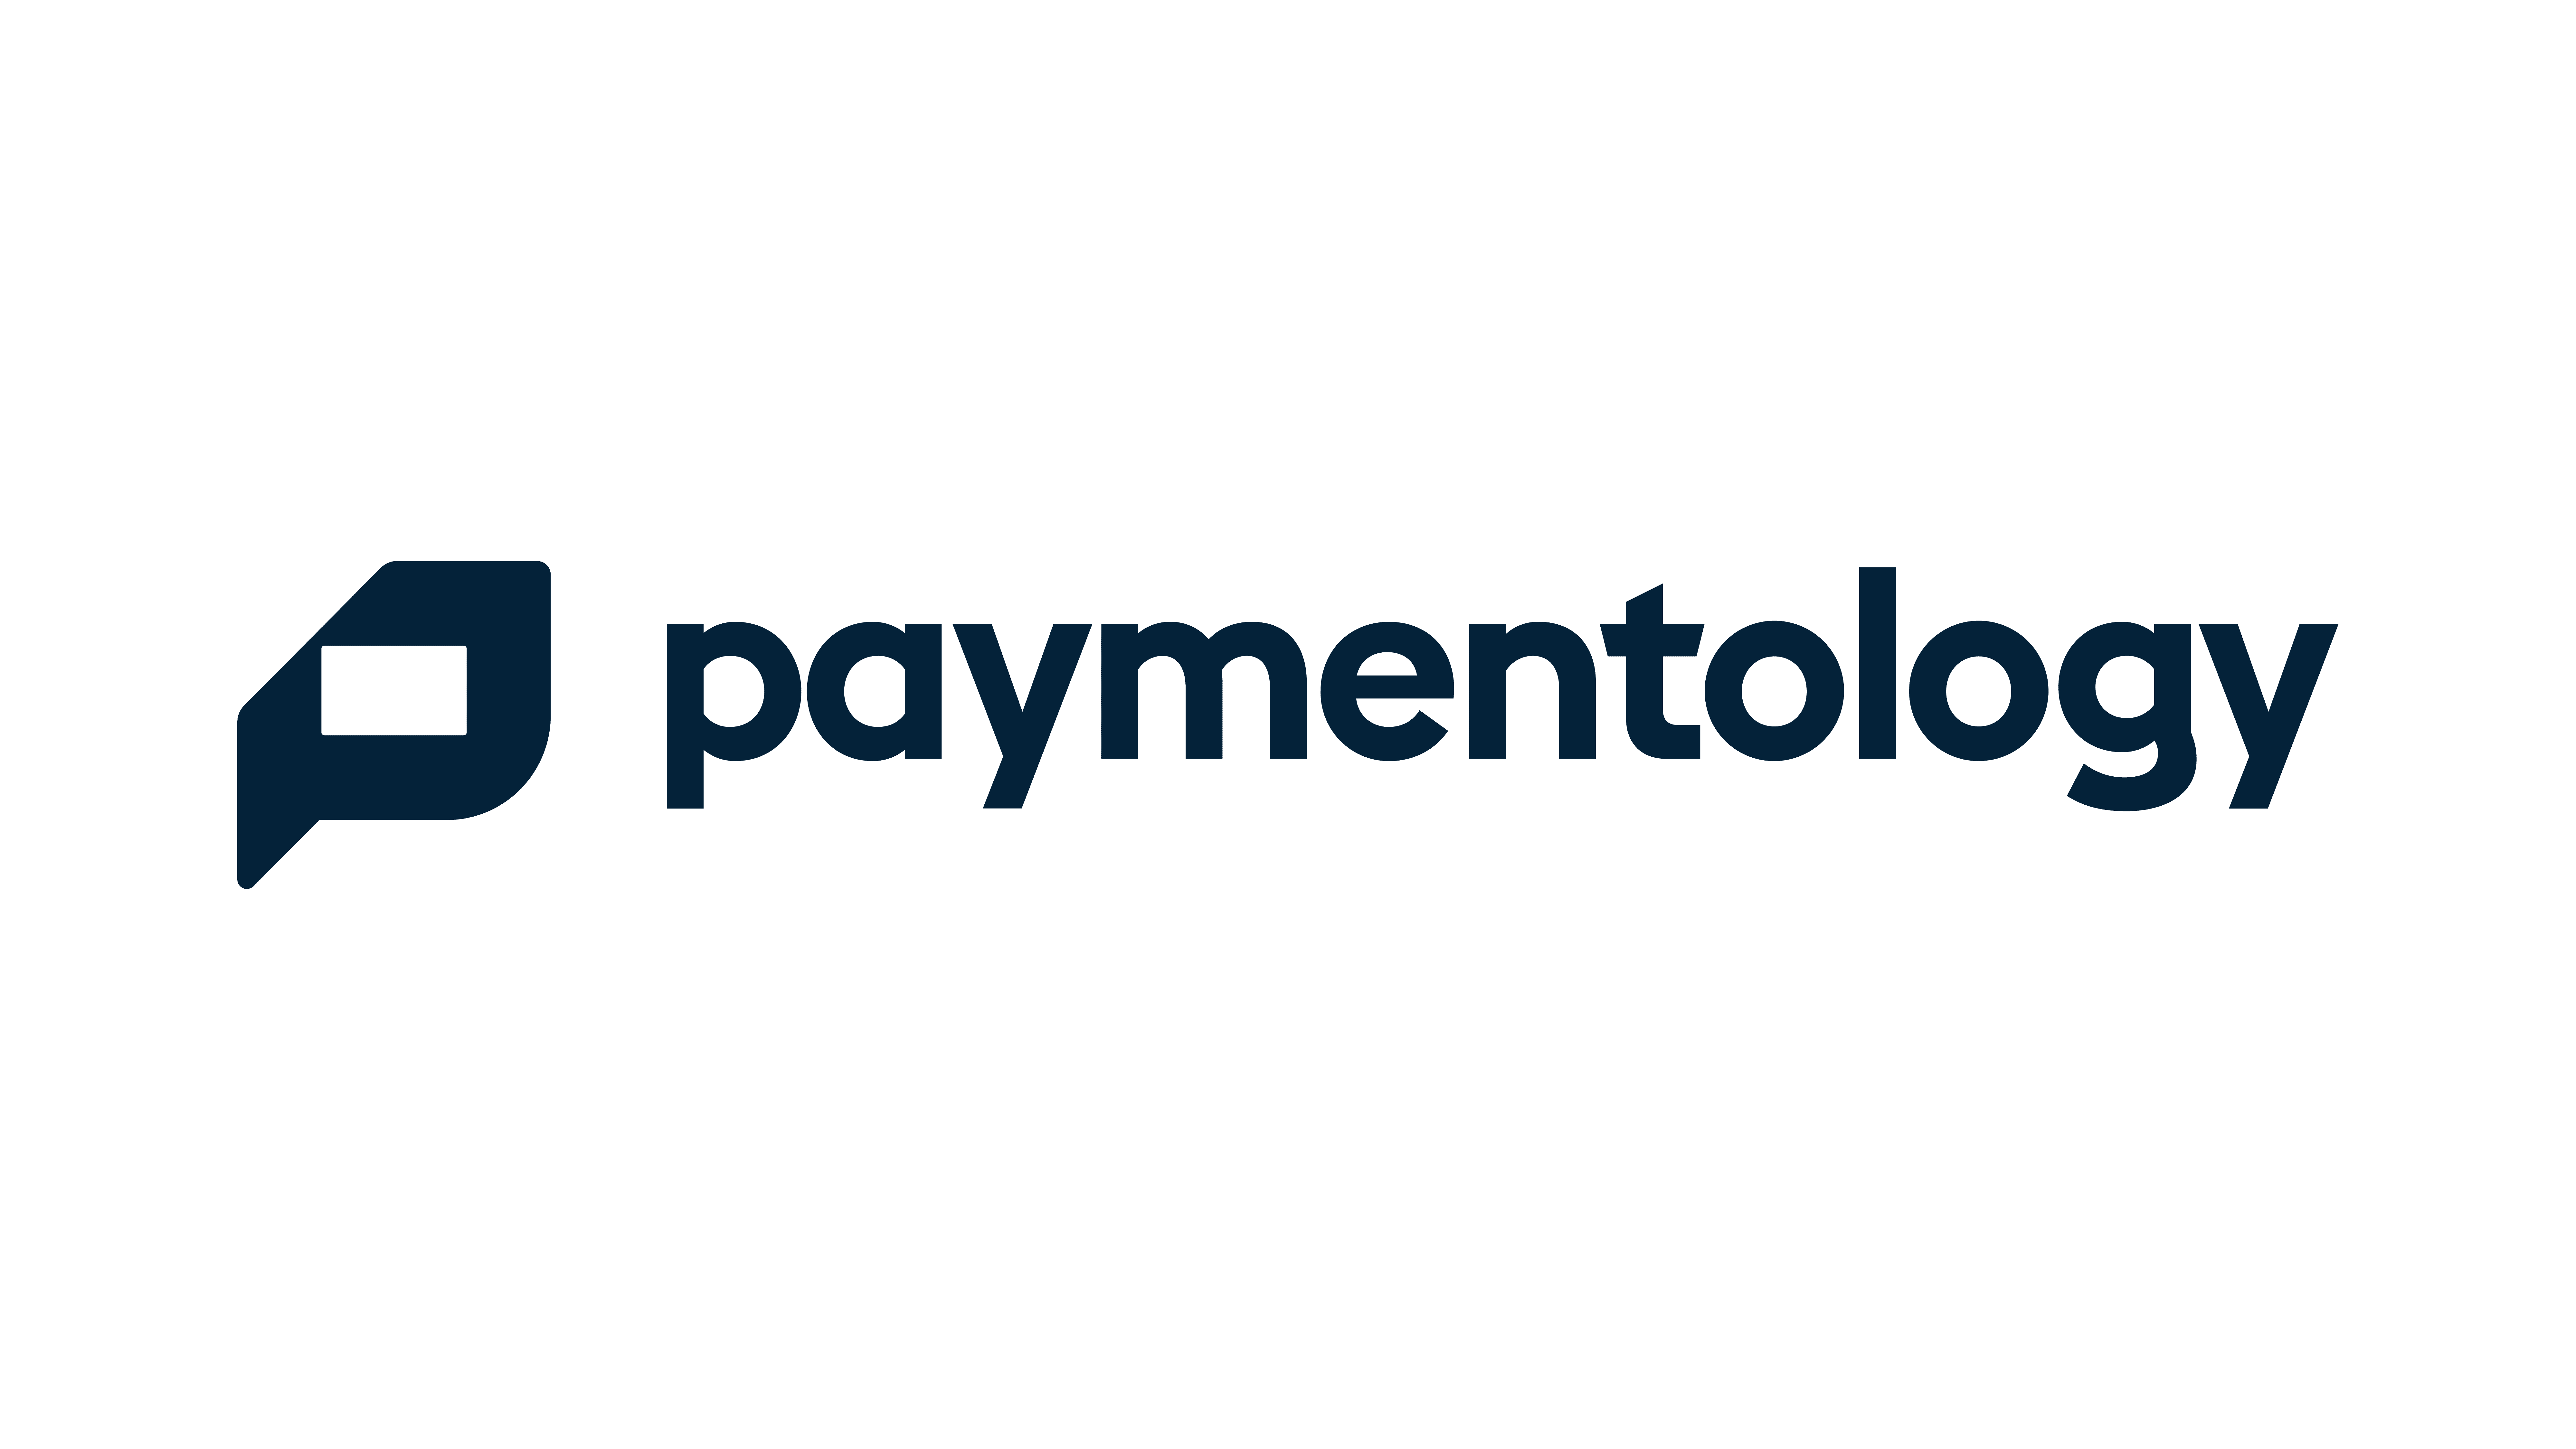 Paymentology powers Fondeadora to launch Apple Pay in Mexico